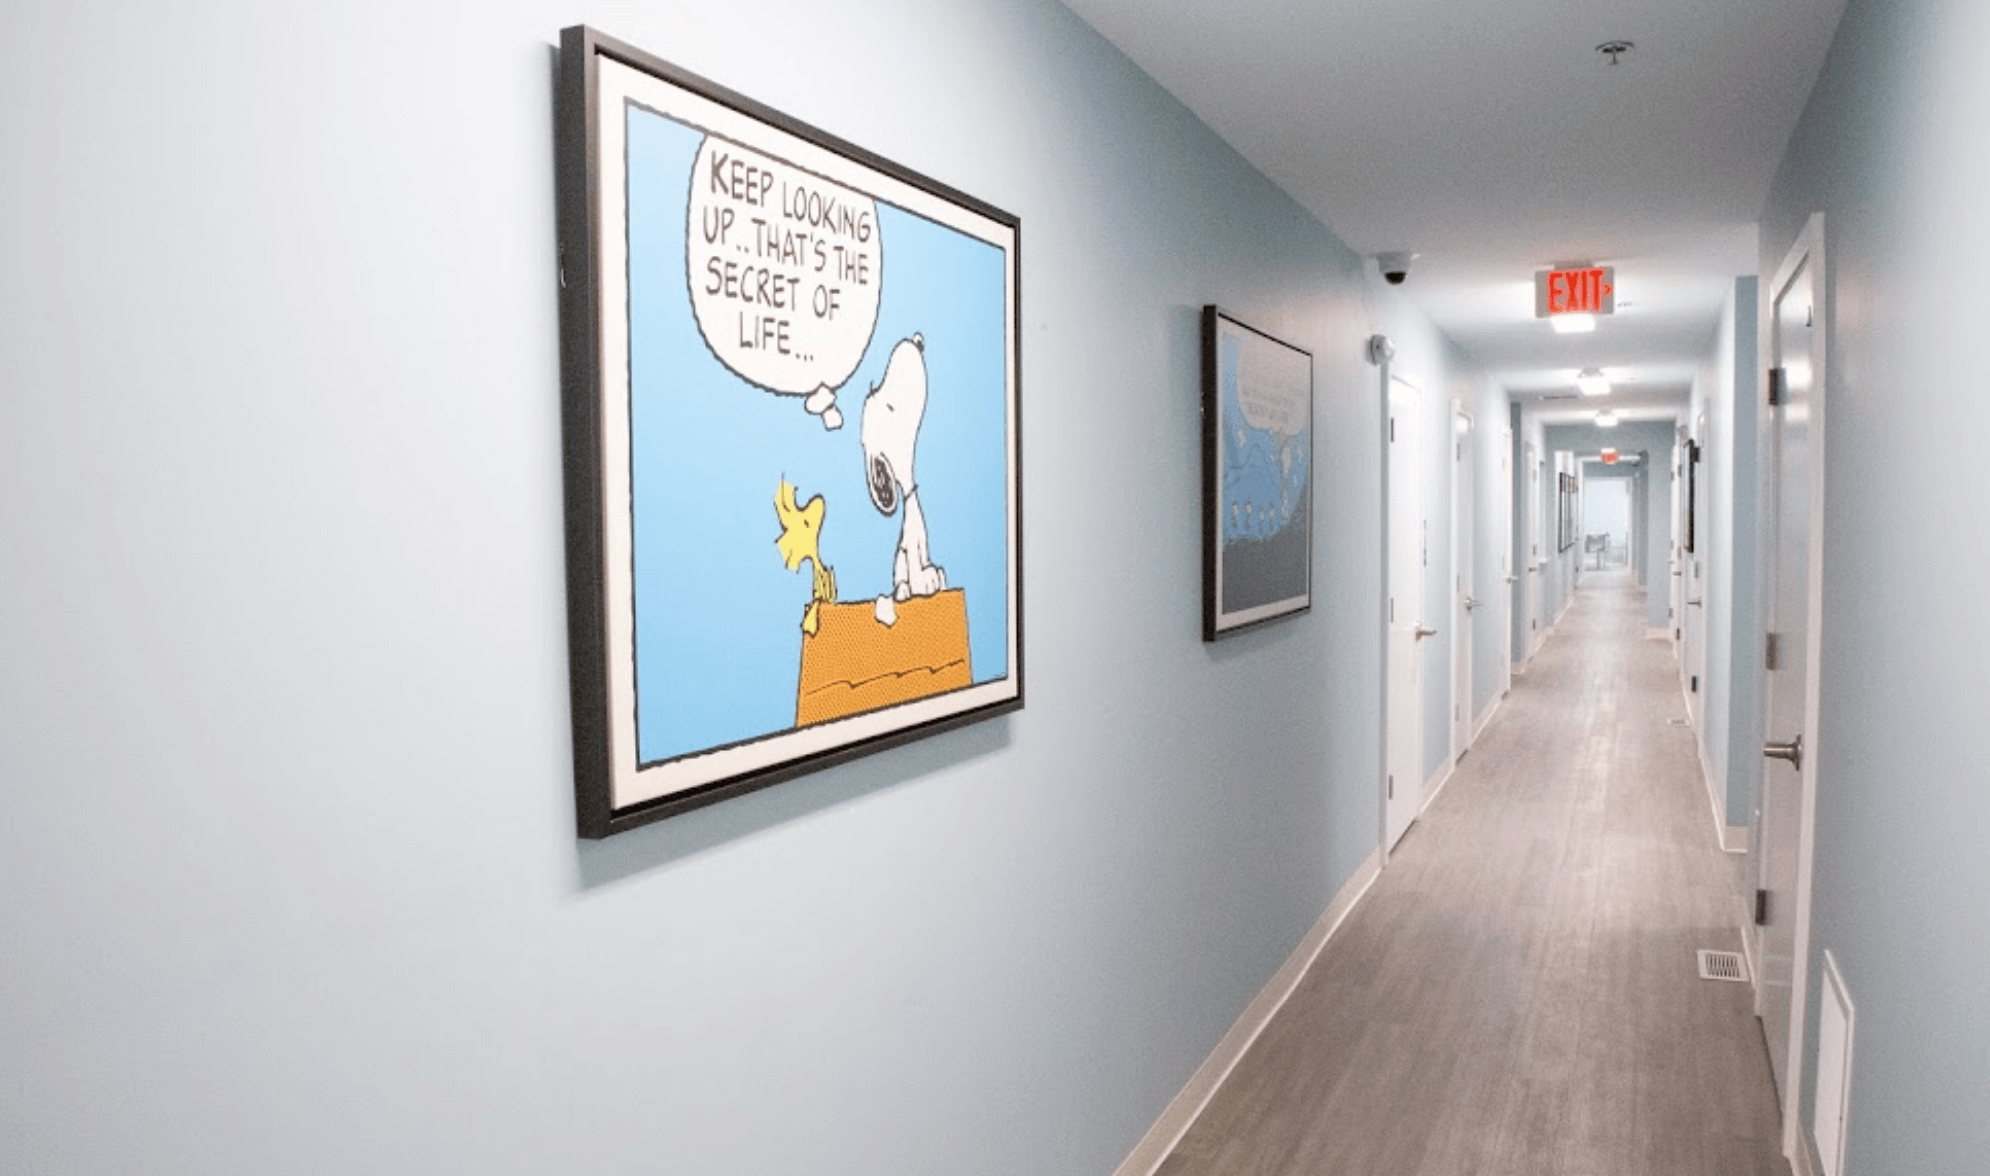 Boca Recovery Center &#8211; New Jersey